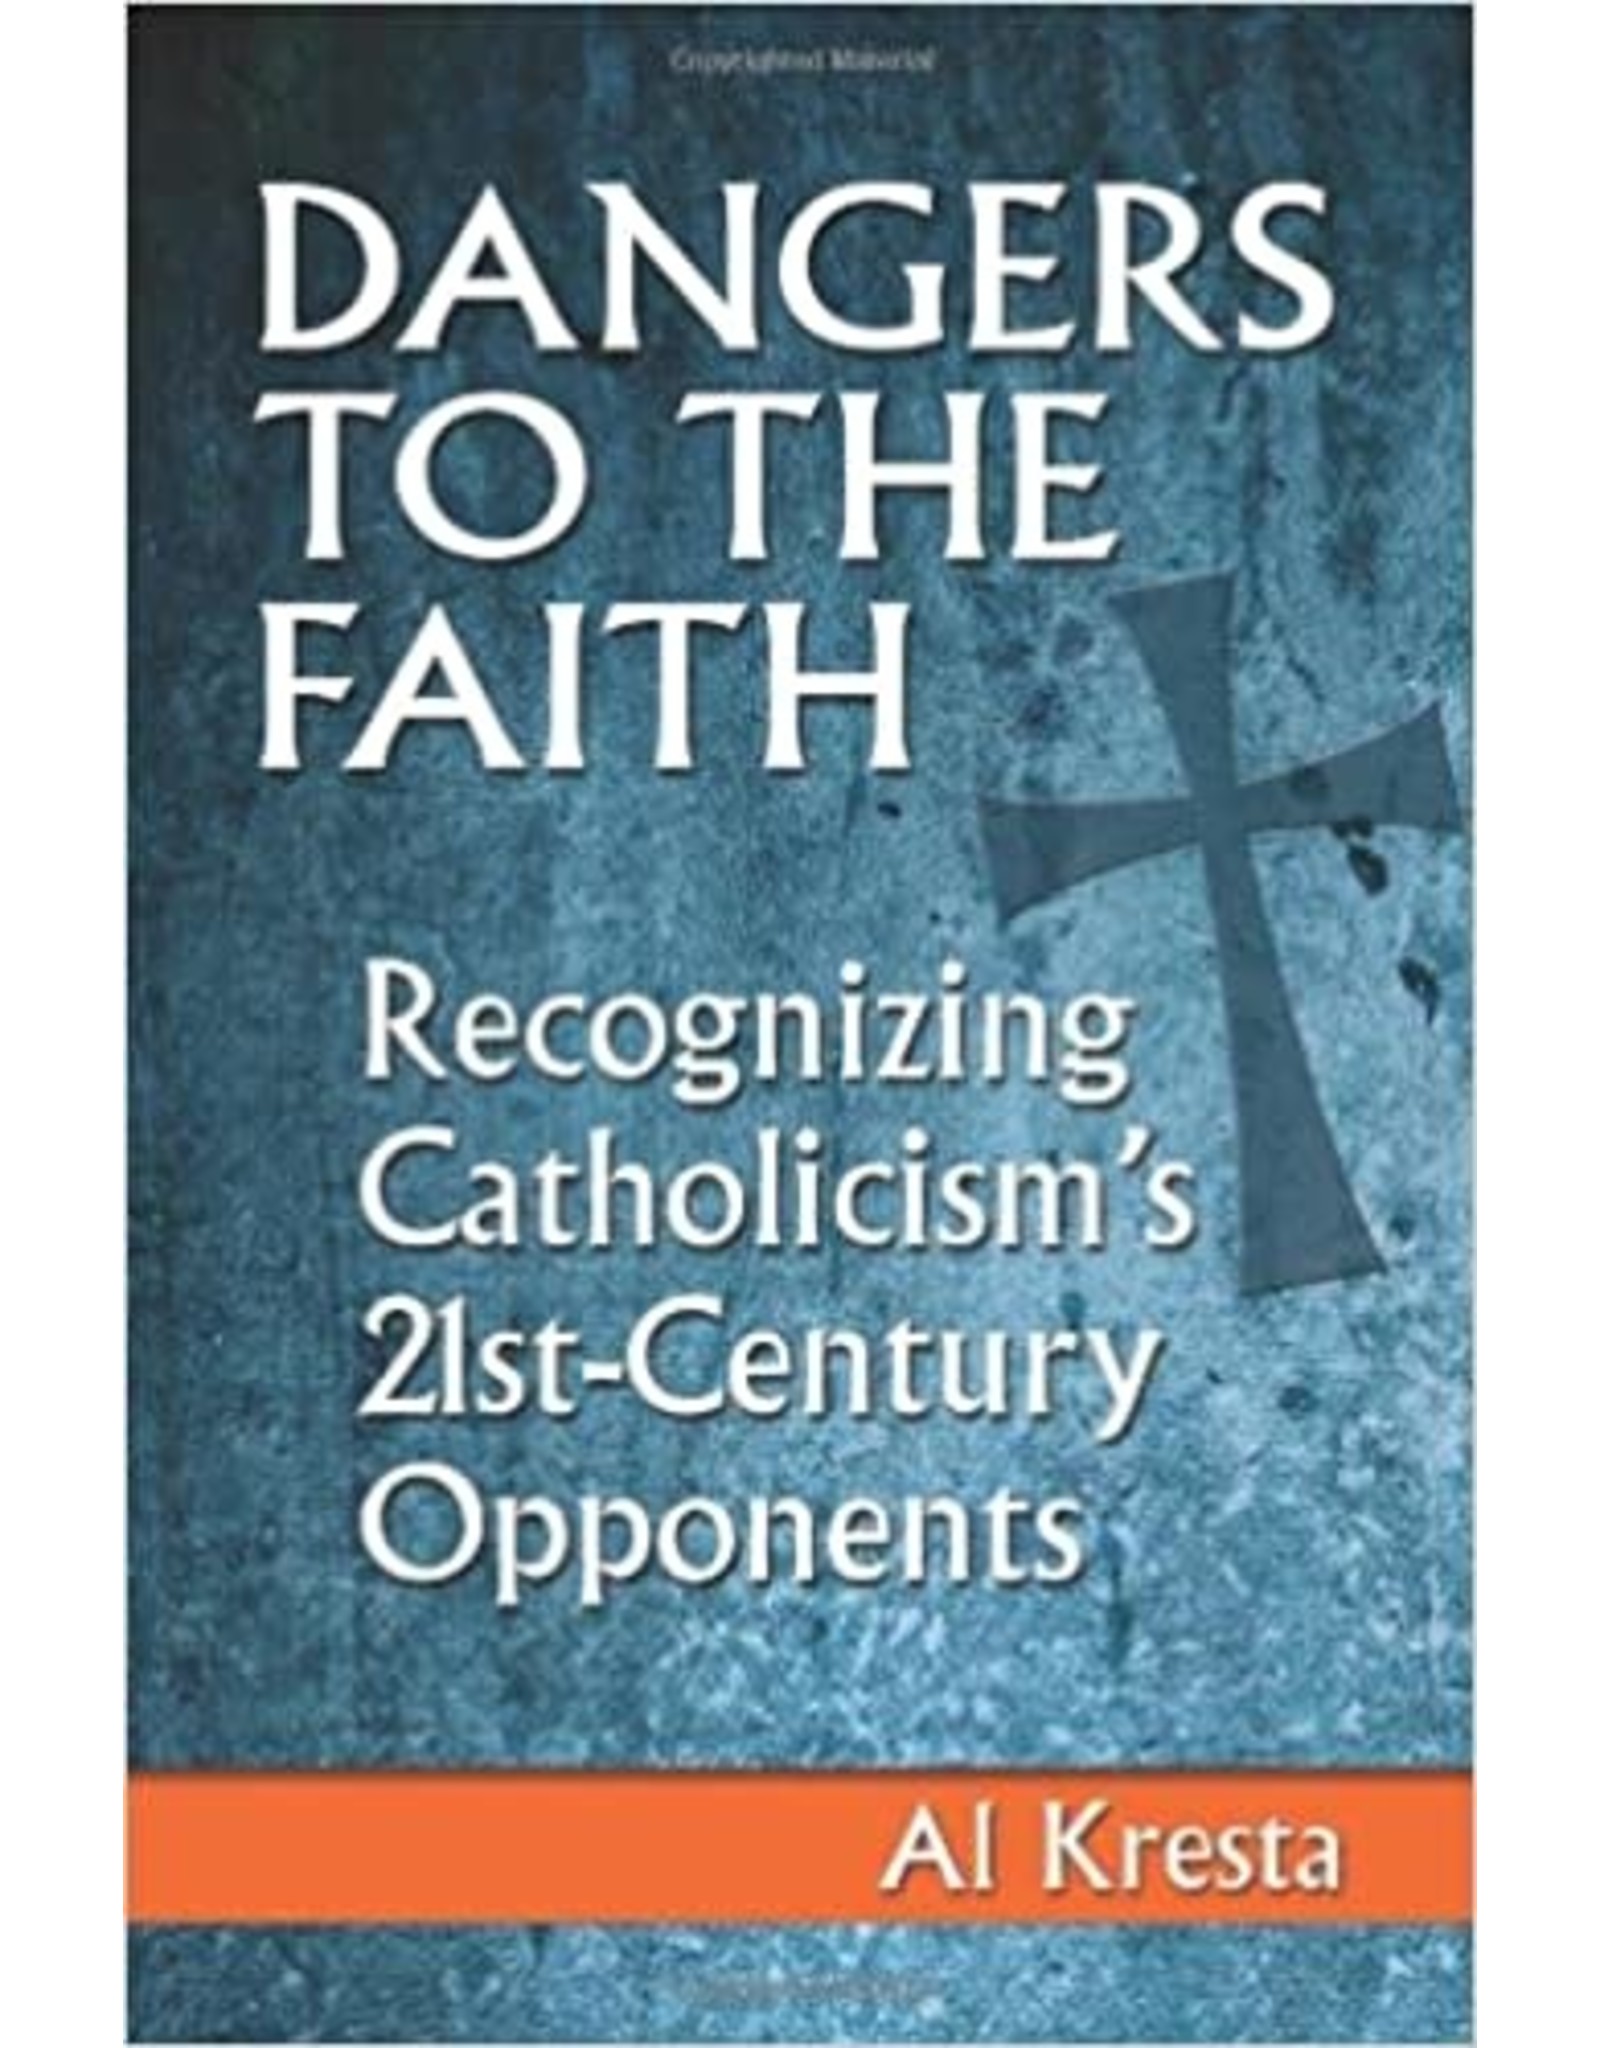 Dangers to the Faith: Recognizing Catholicism's 21st Century Opponents